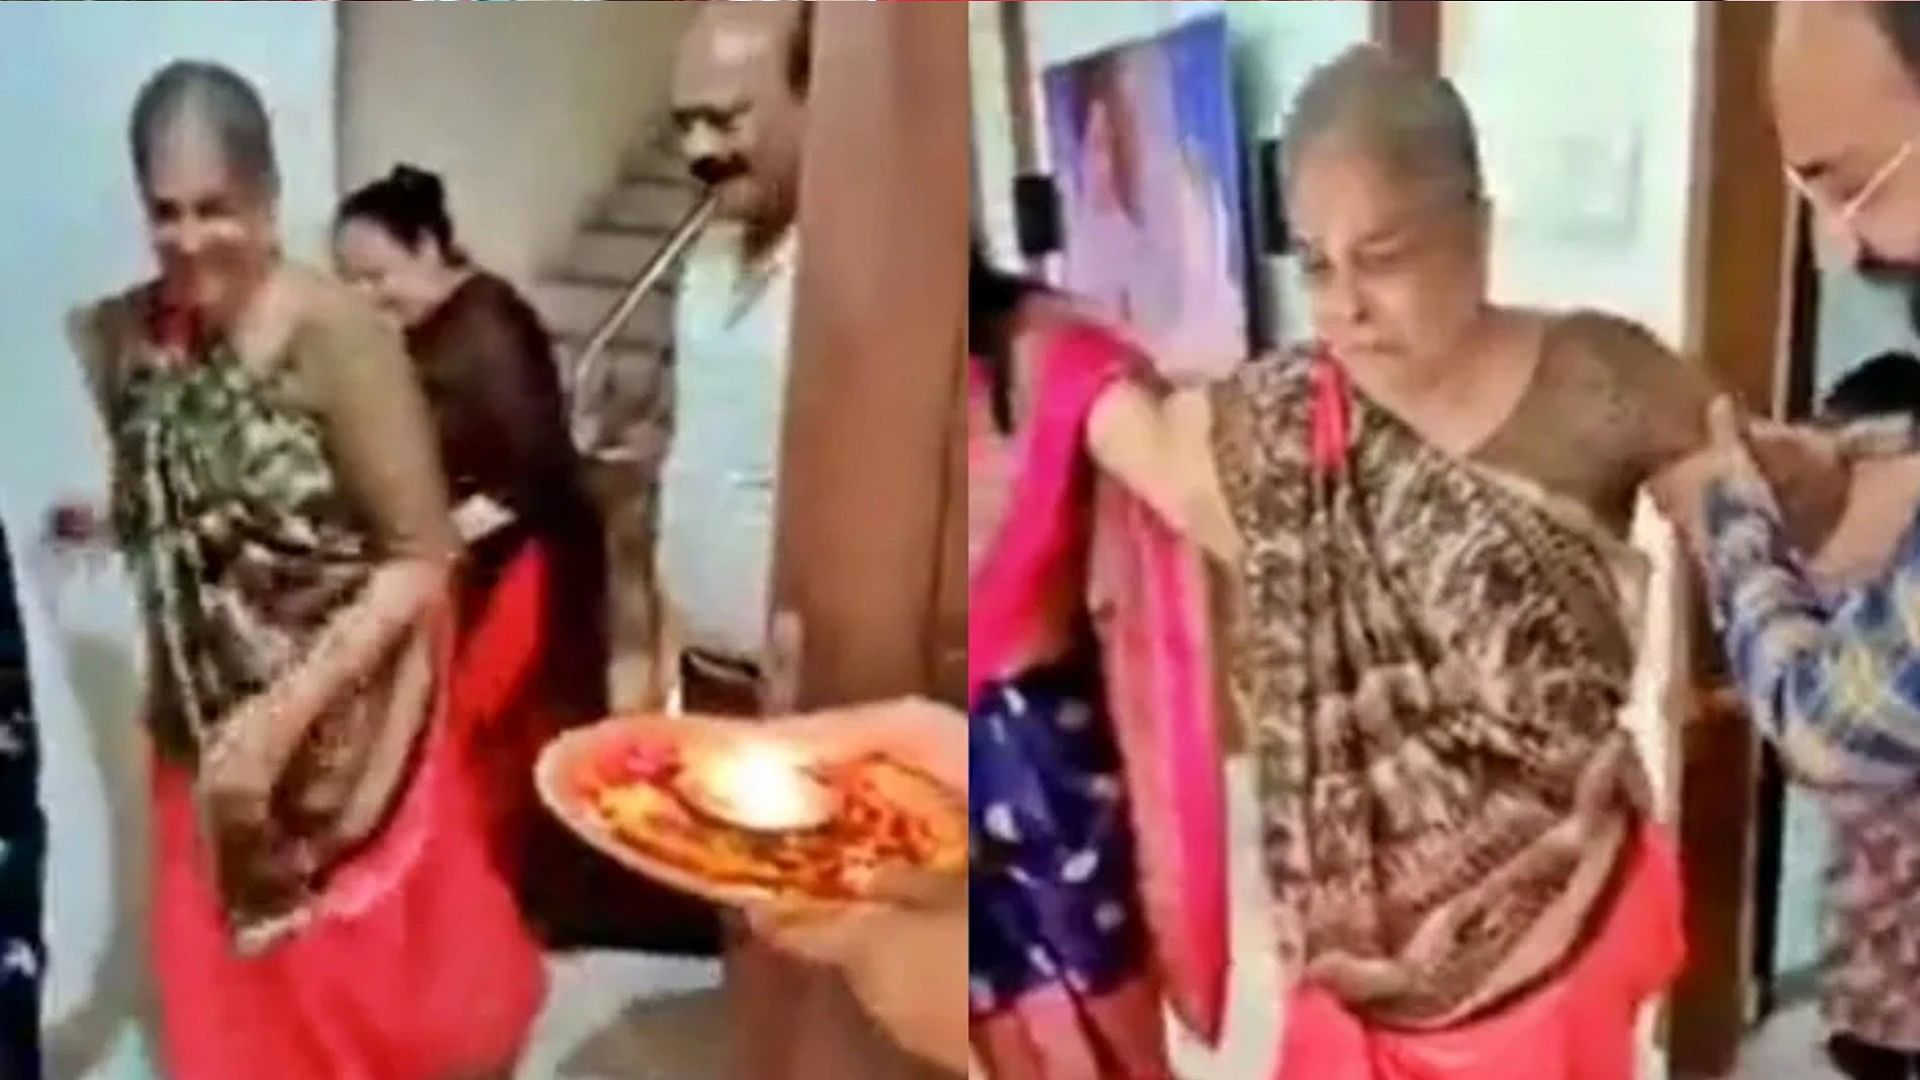 Bahu welcomes Saas To Her New Home Heart Touching Video Is Going Viral On Social Media